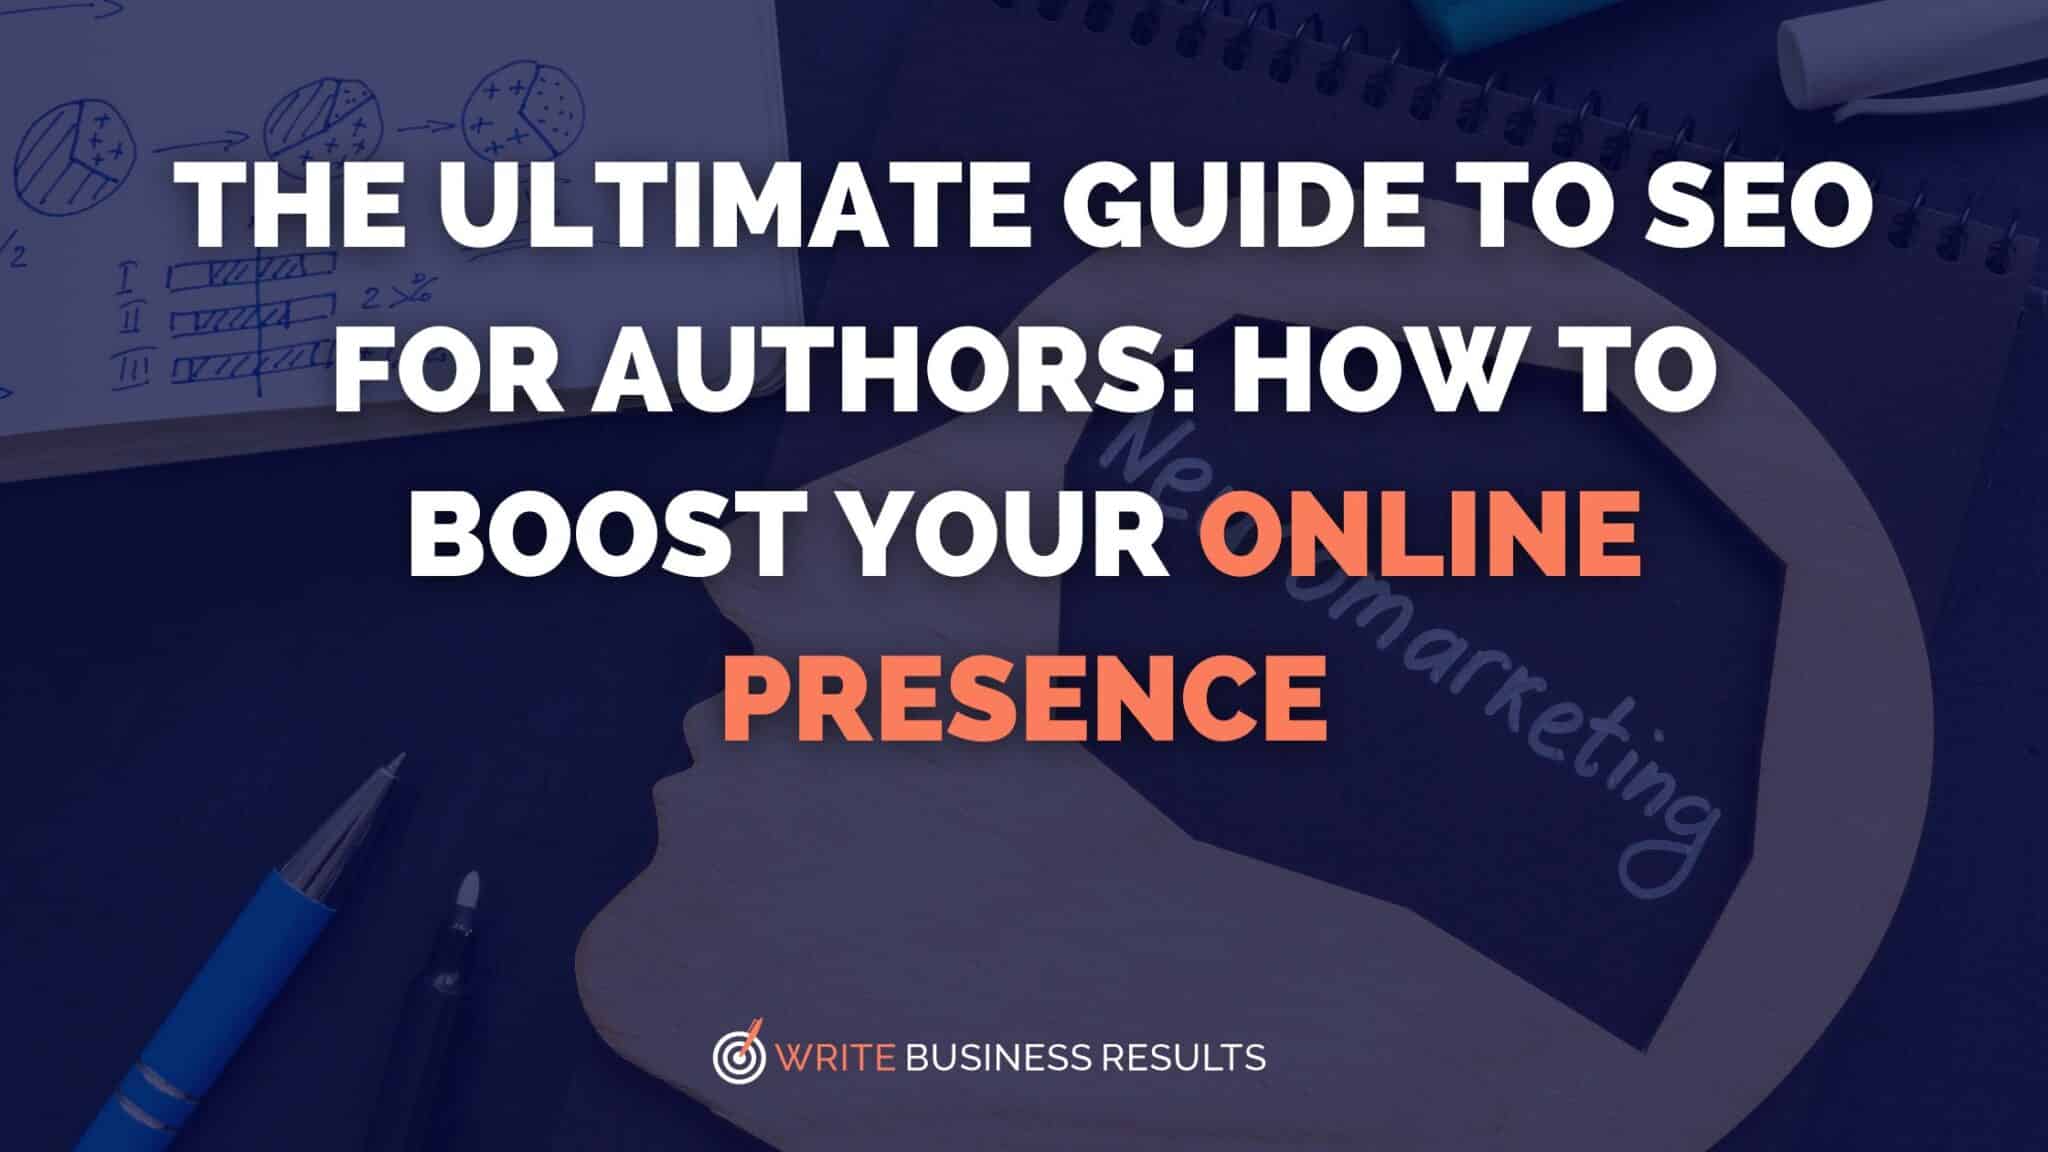 The Ultimate Guide To SEO For Authors: How To Boost Your Online Presence